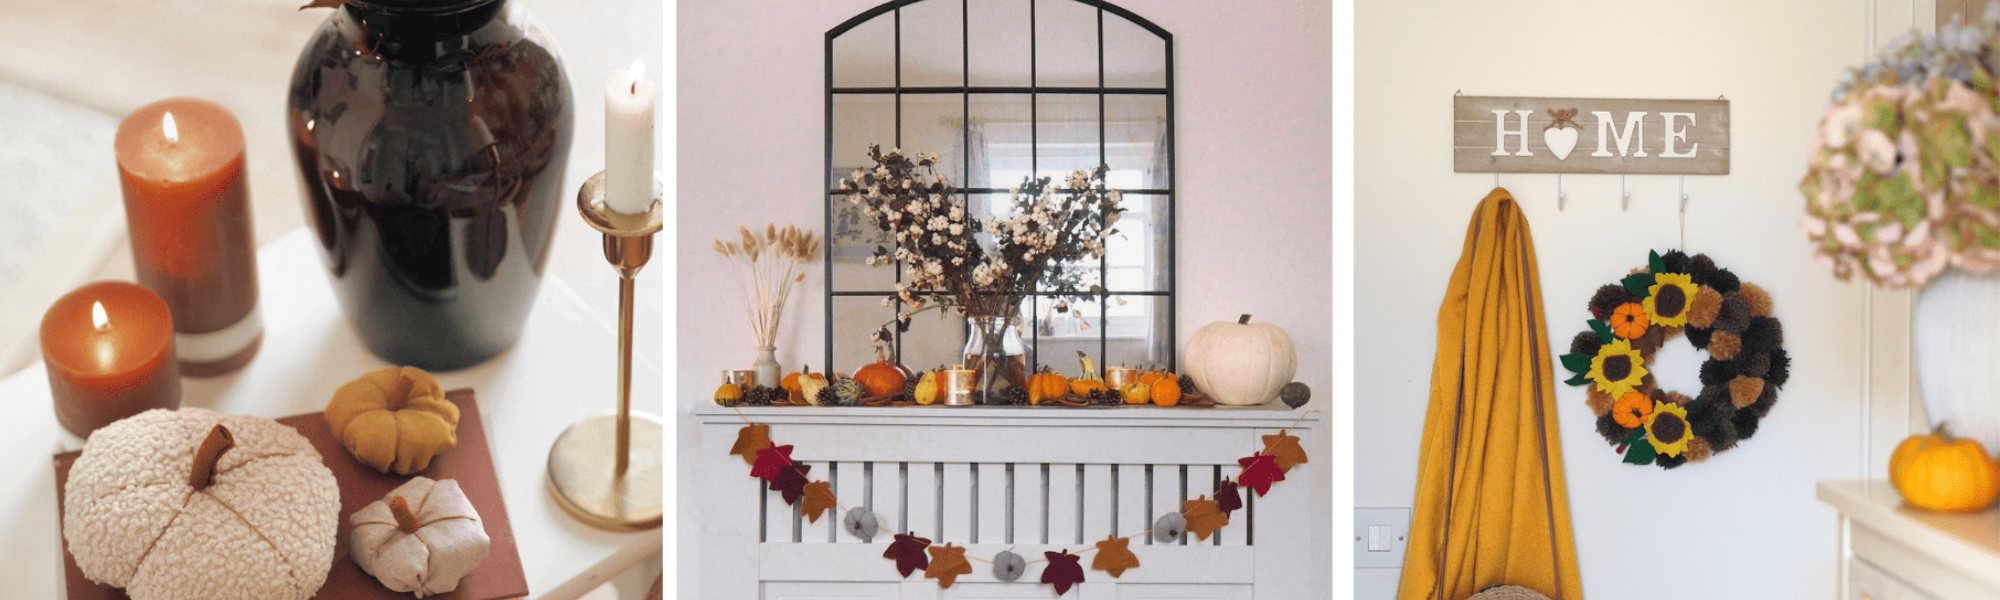 DIY Autumn decor you can make yourself for pennies 